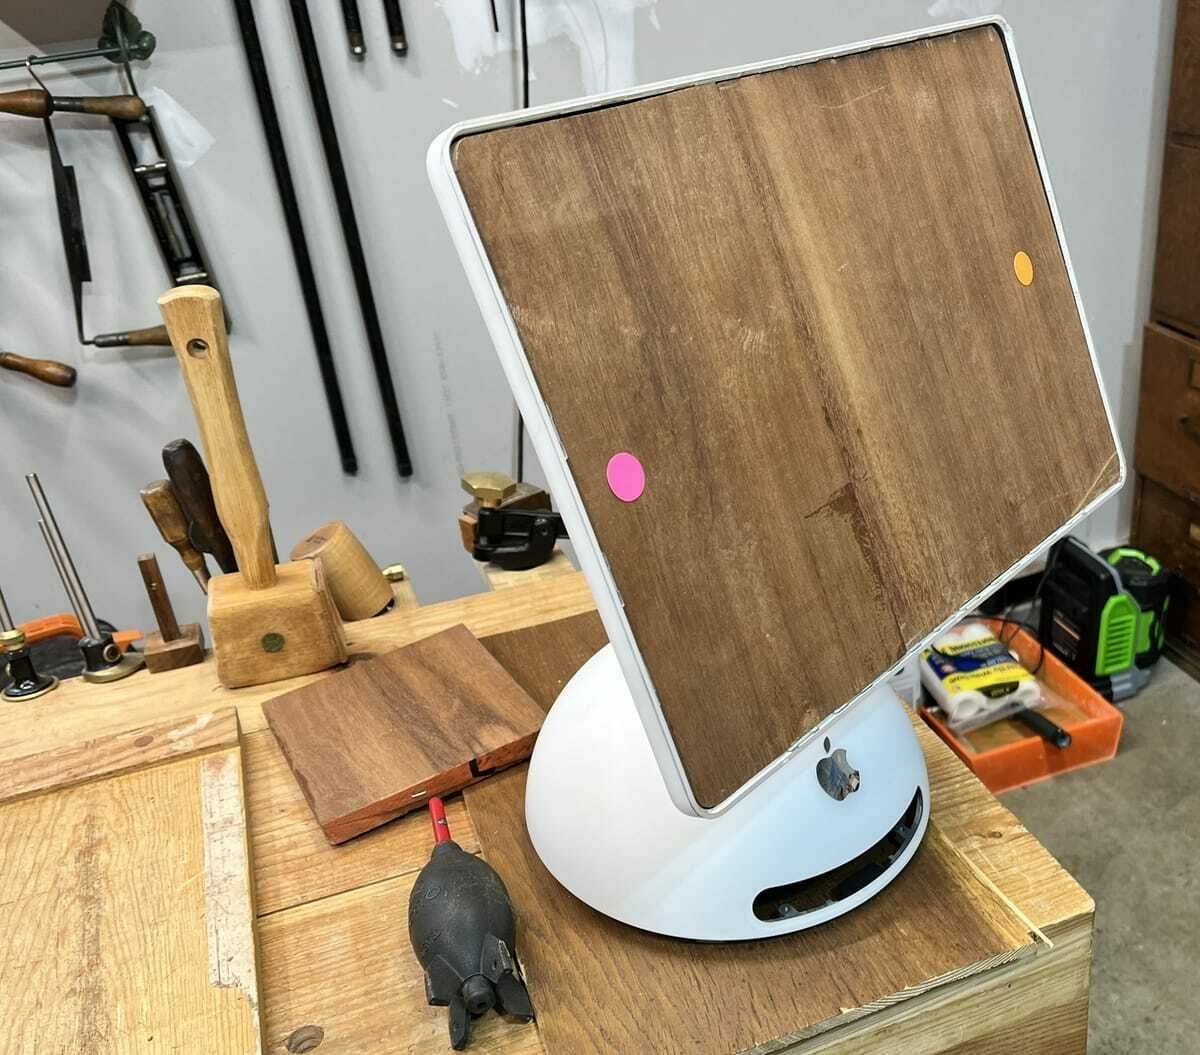 a gutted imac G4 with wood in place of screen